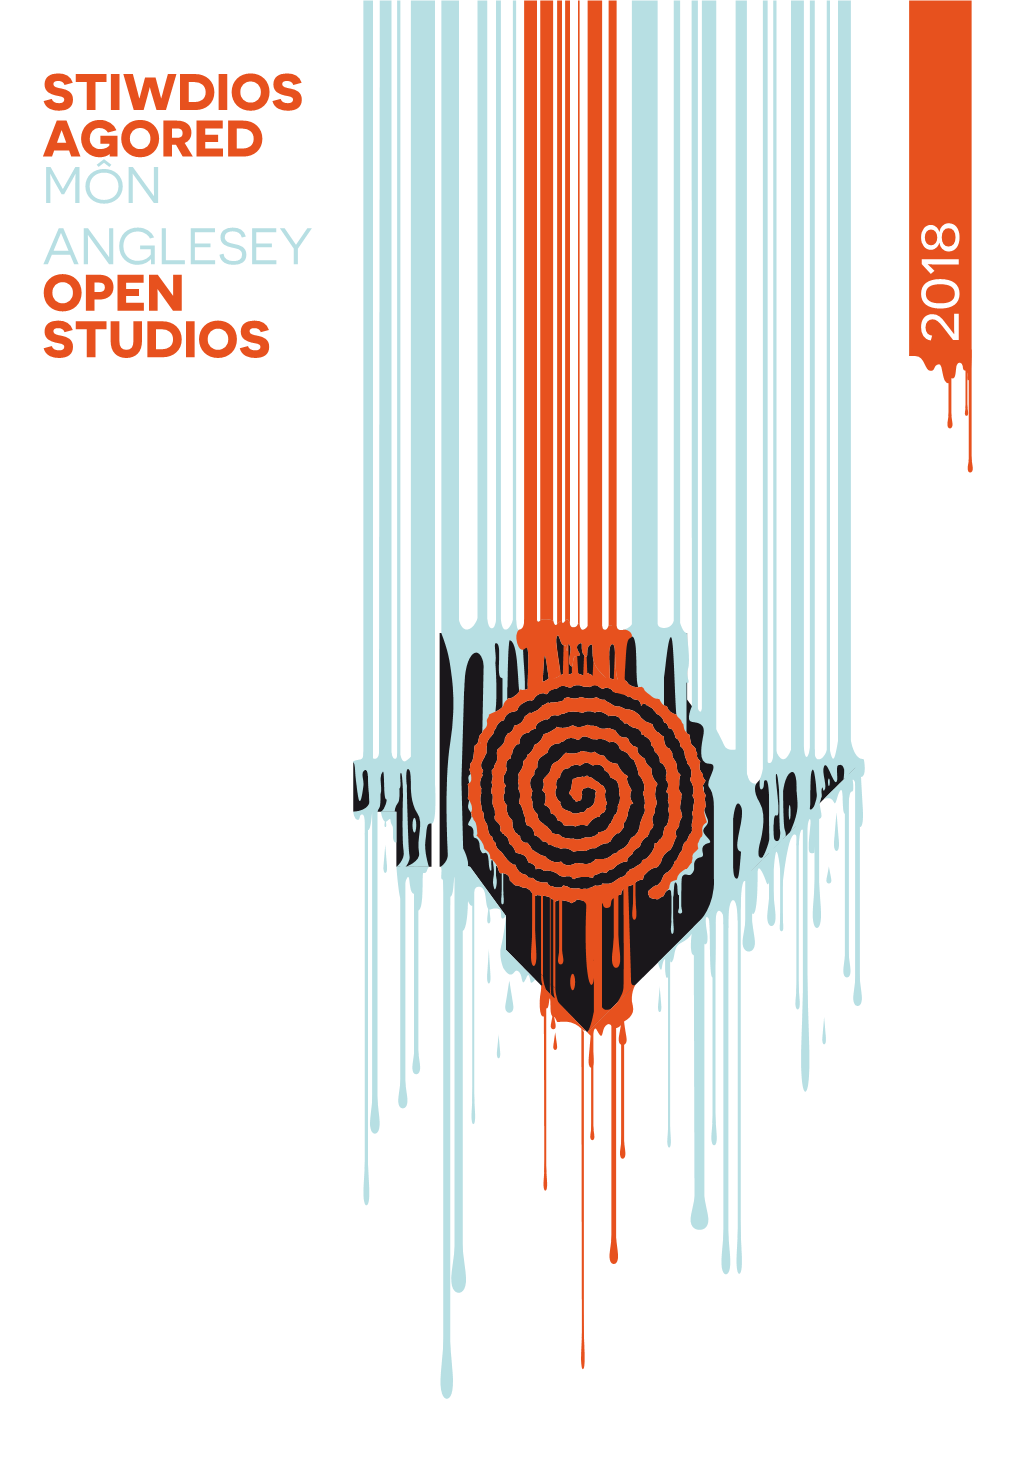 Croeso I Stiwd Agored Welco to the Angles Open Studio